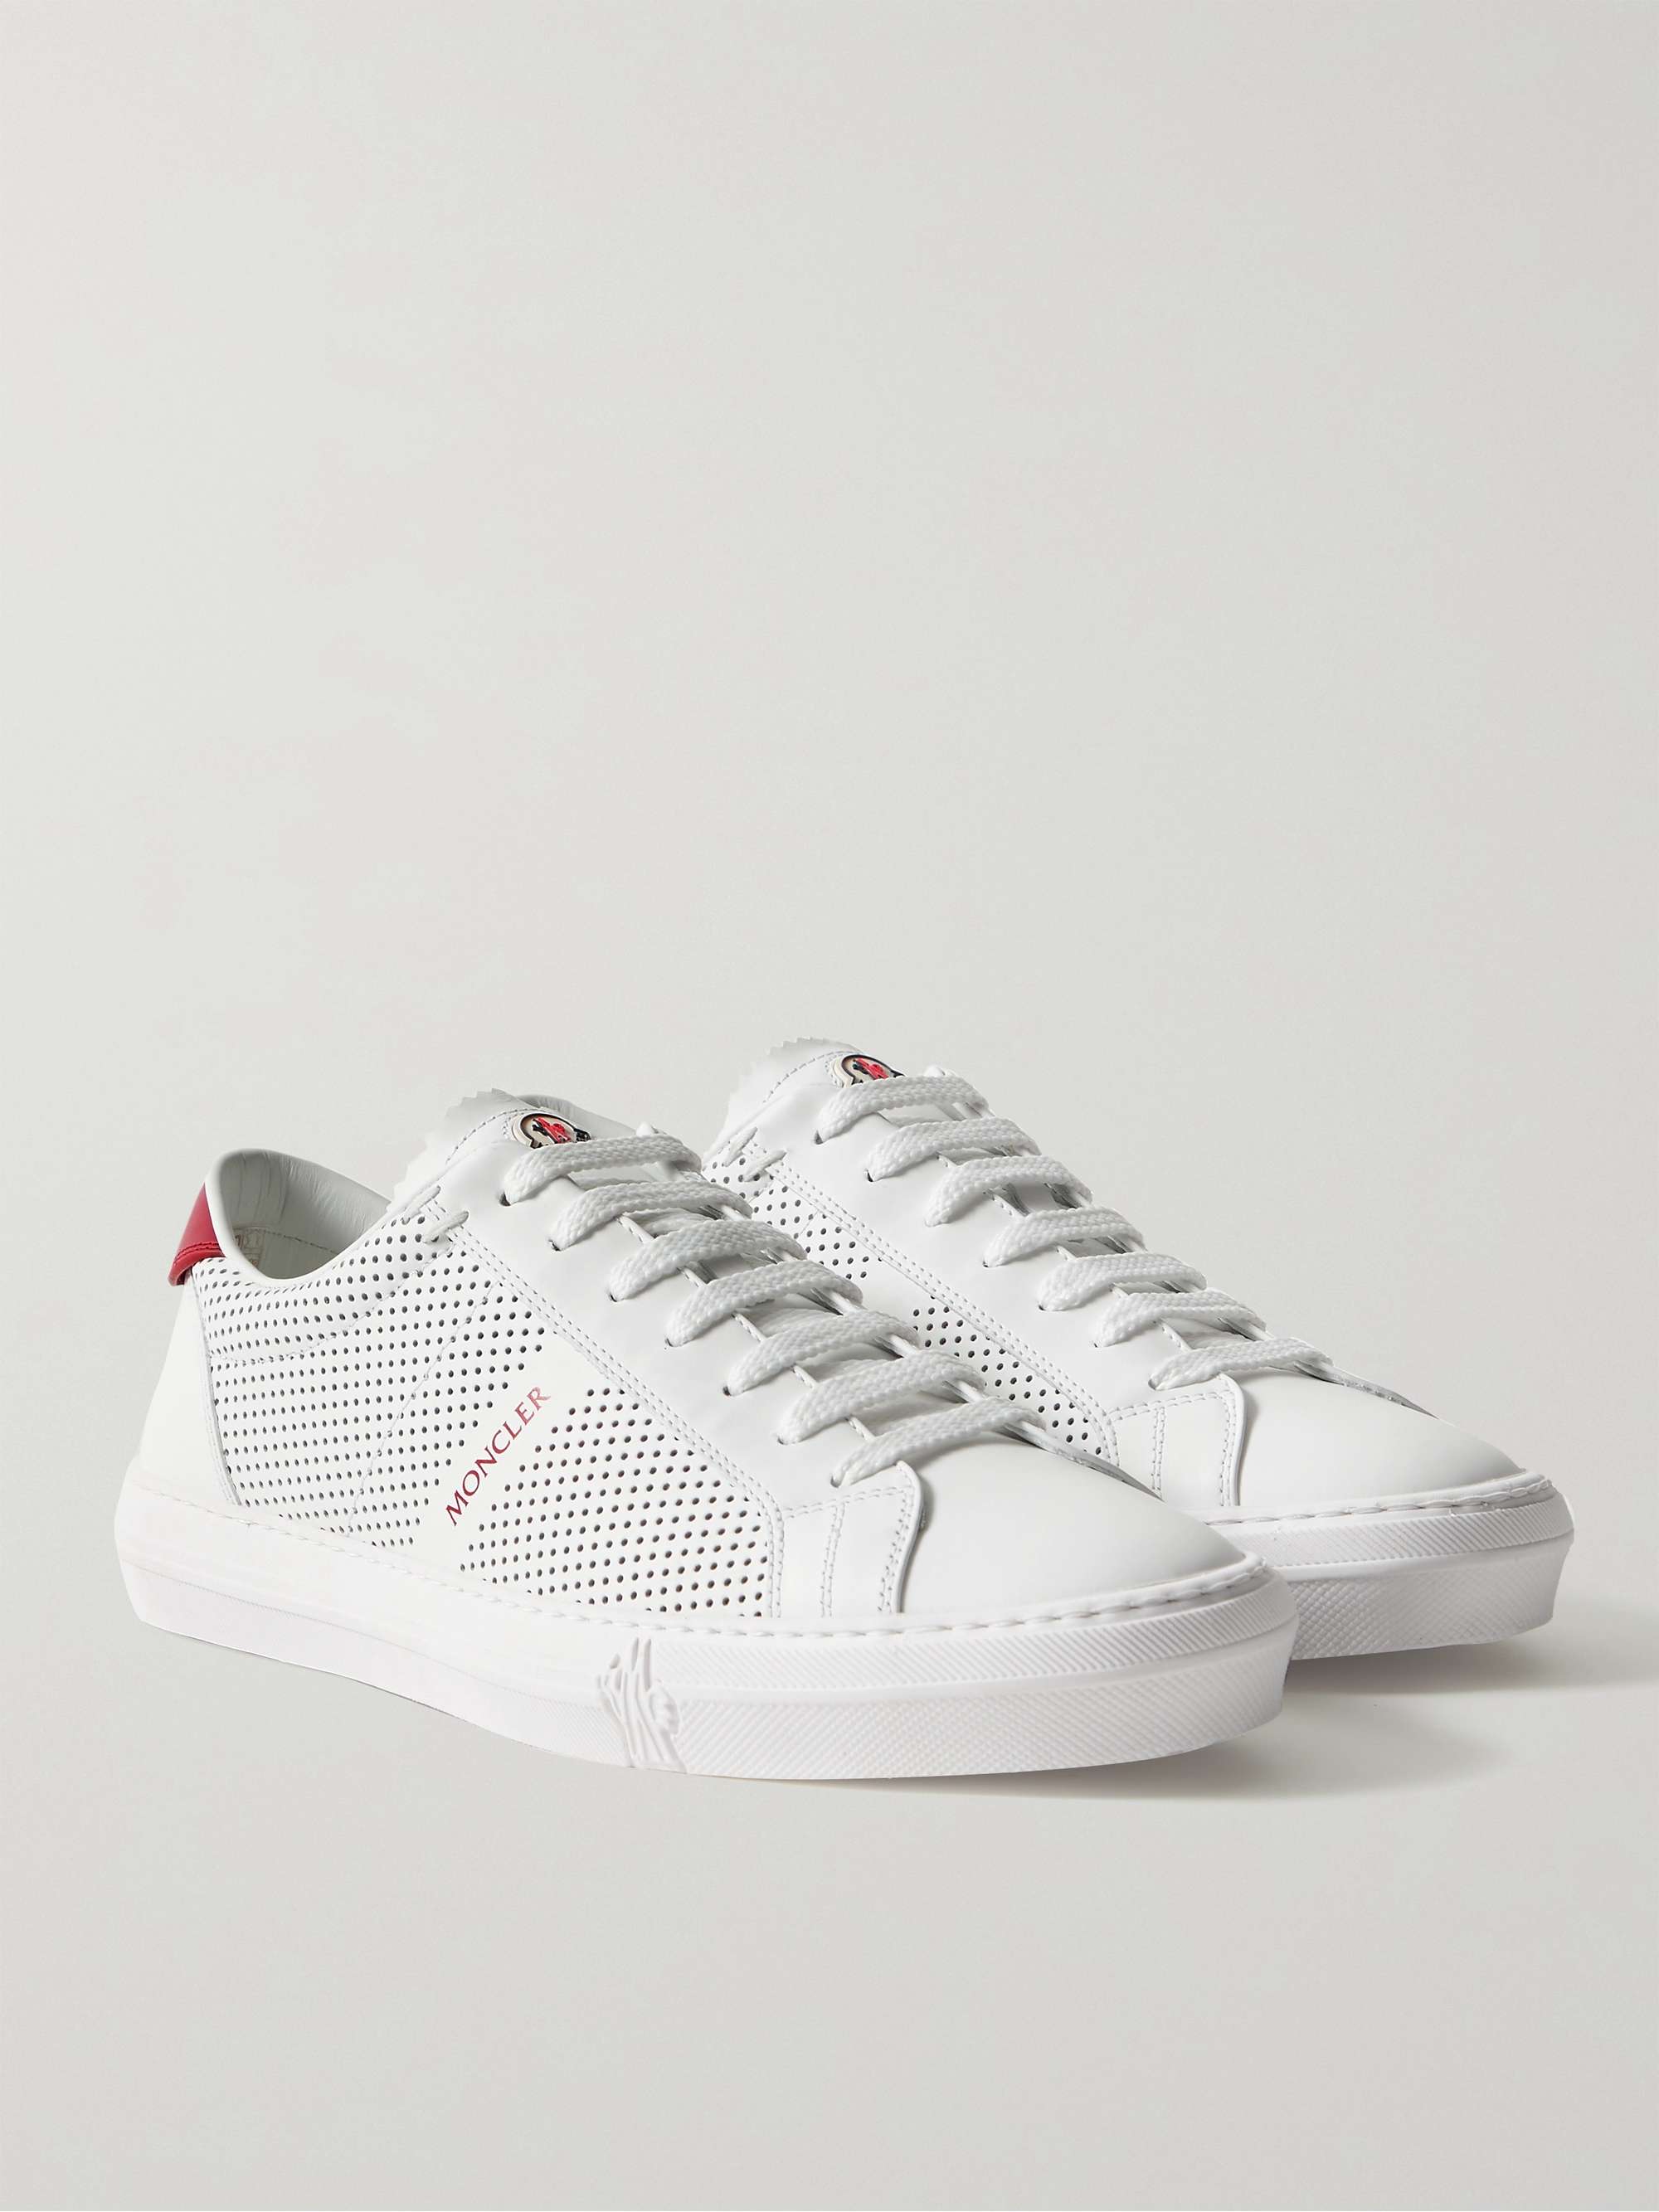 New Monaco Perforated Leather Sneakers